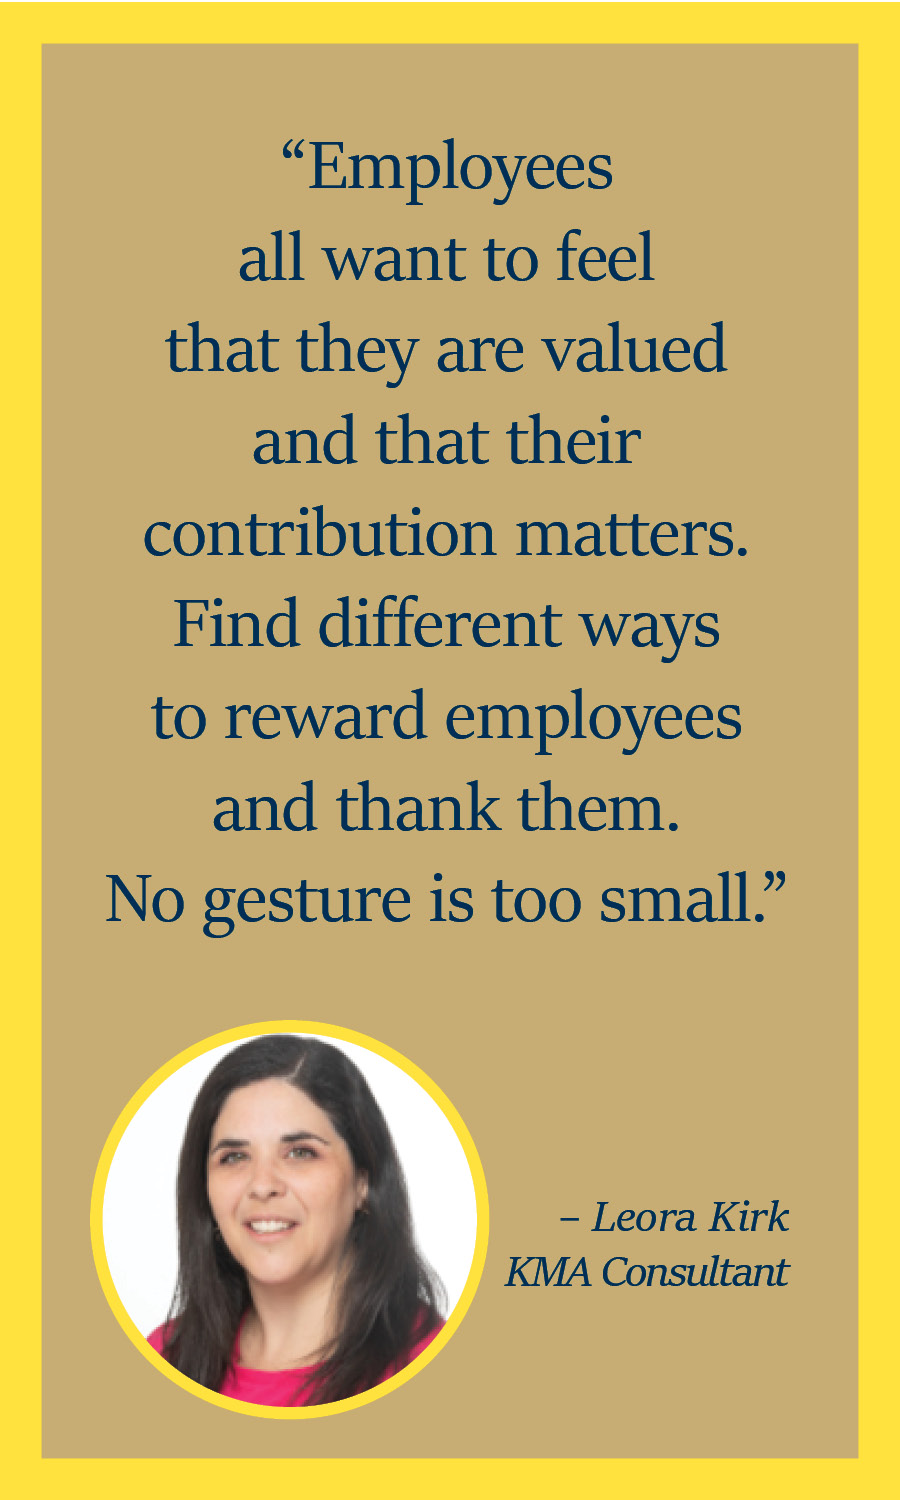 "Employees all want to feel that they are valued and that their contribution matters. Find different ways to reward employees and thank them. No gesture is too small." - Leora Kirk, KMA Consultant